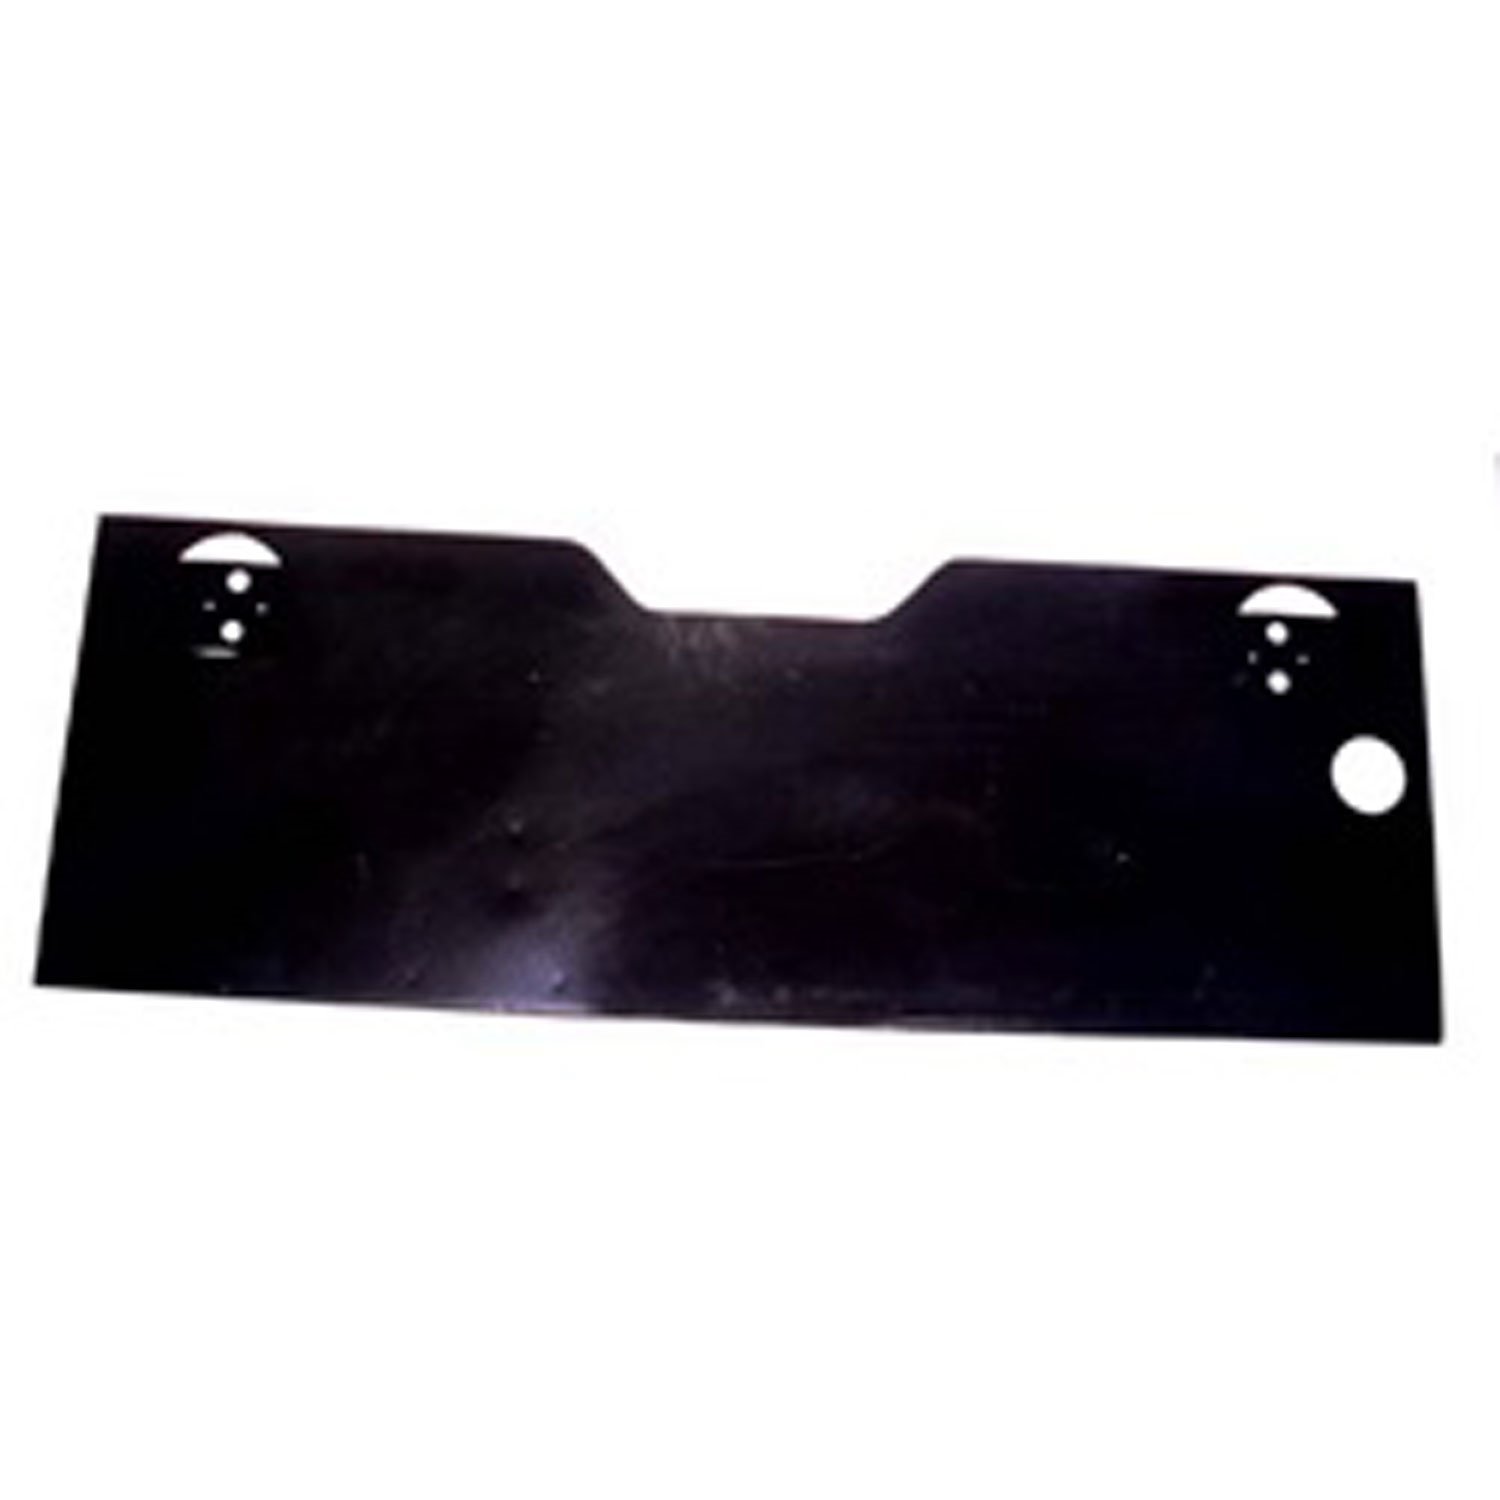 This reproduction rear tail panel from Omix-ADA fits 41-45 MB and Ford GPW.